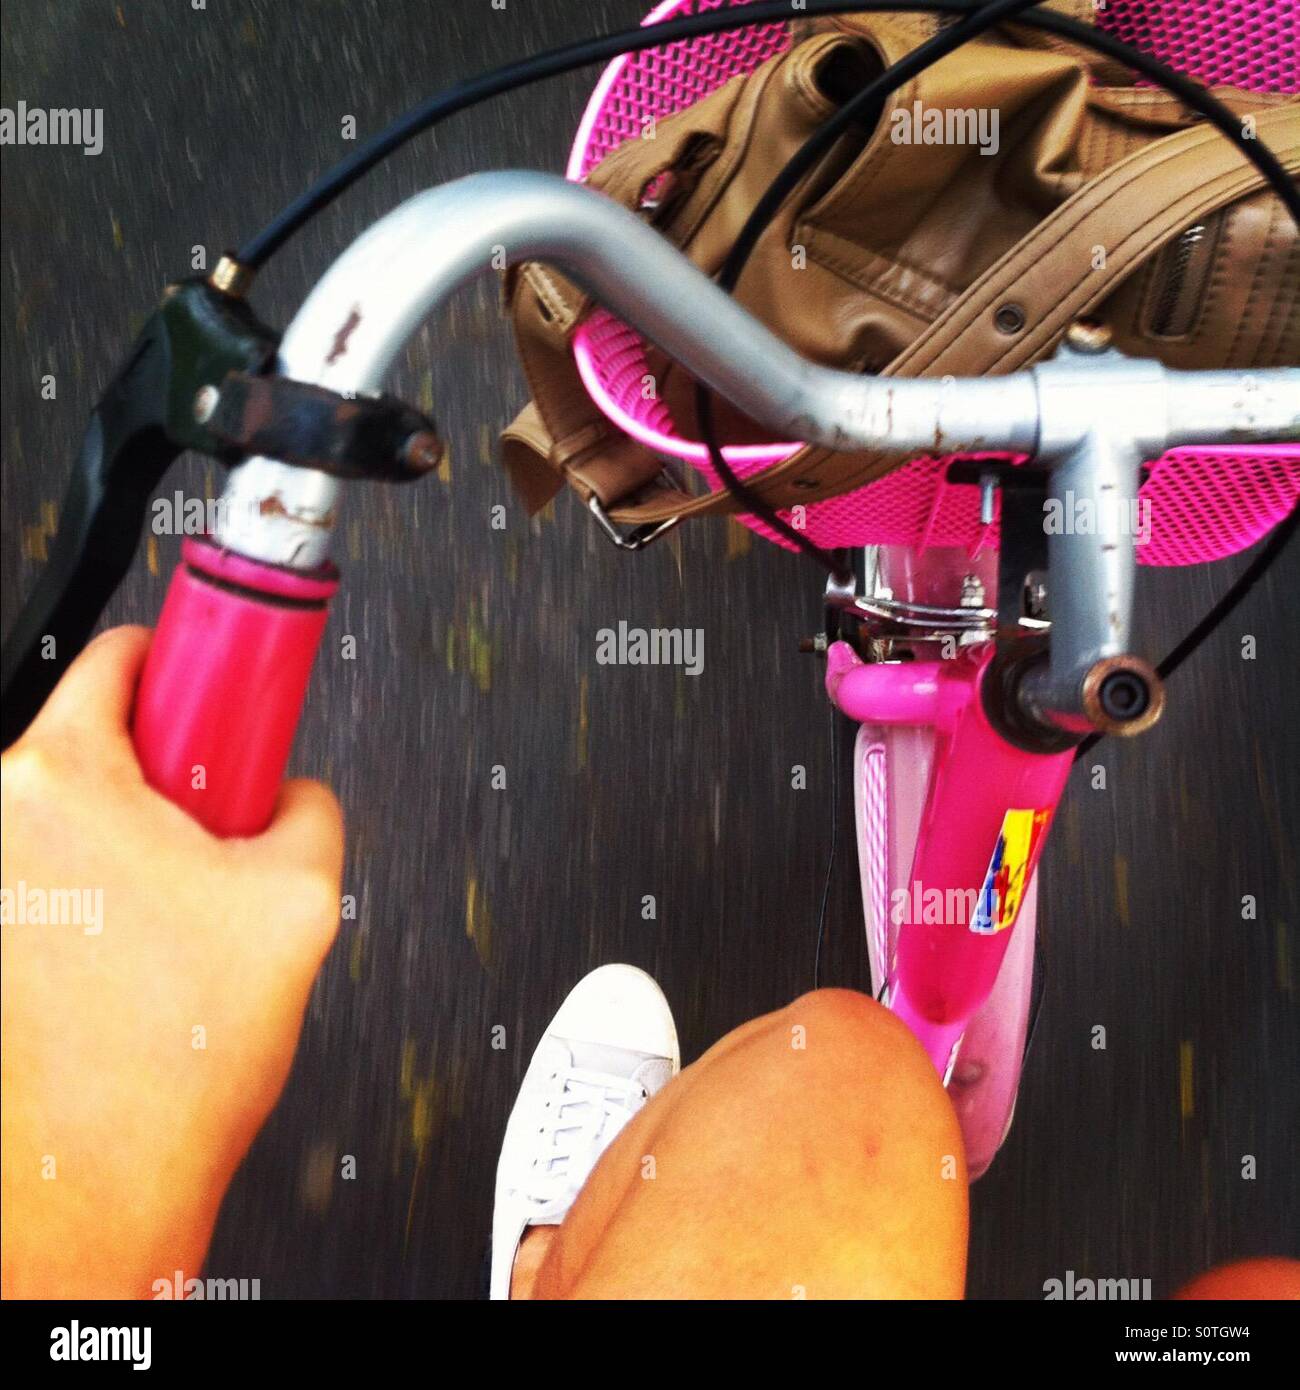 Riding a pink bicycle Stock Photo